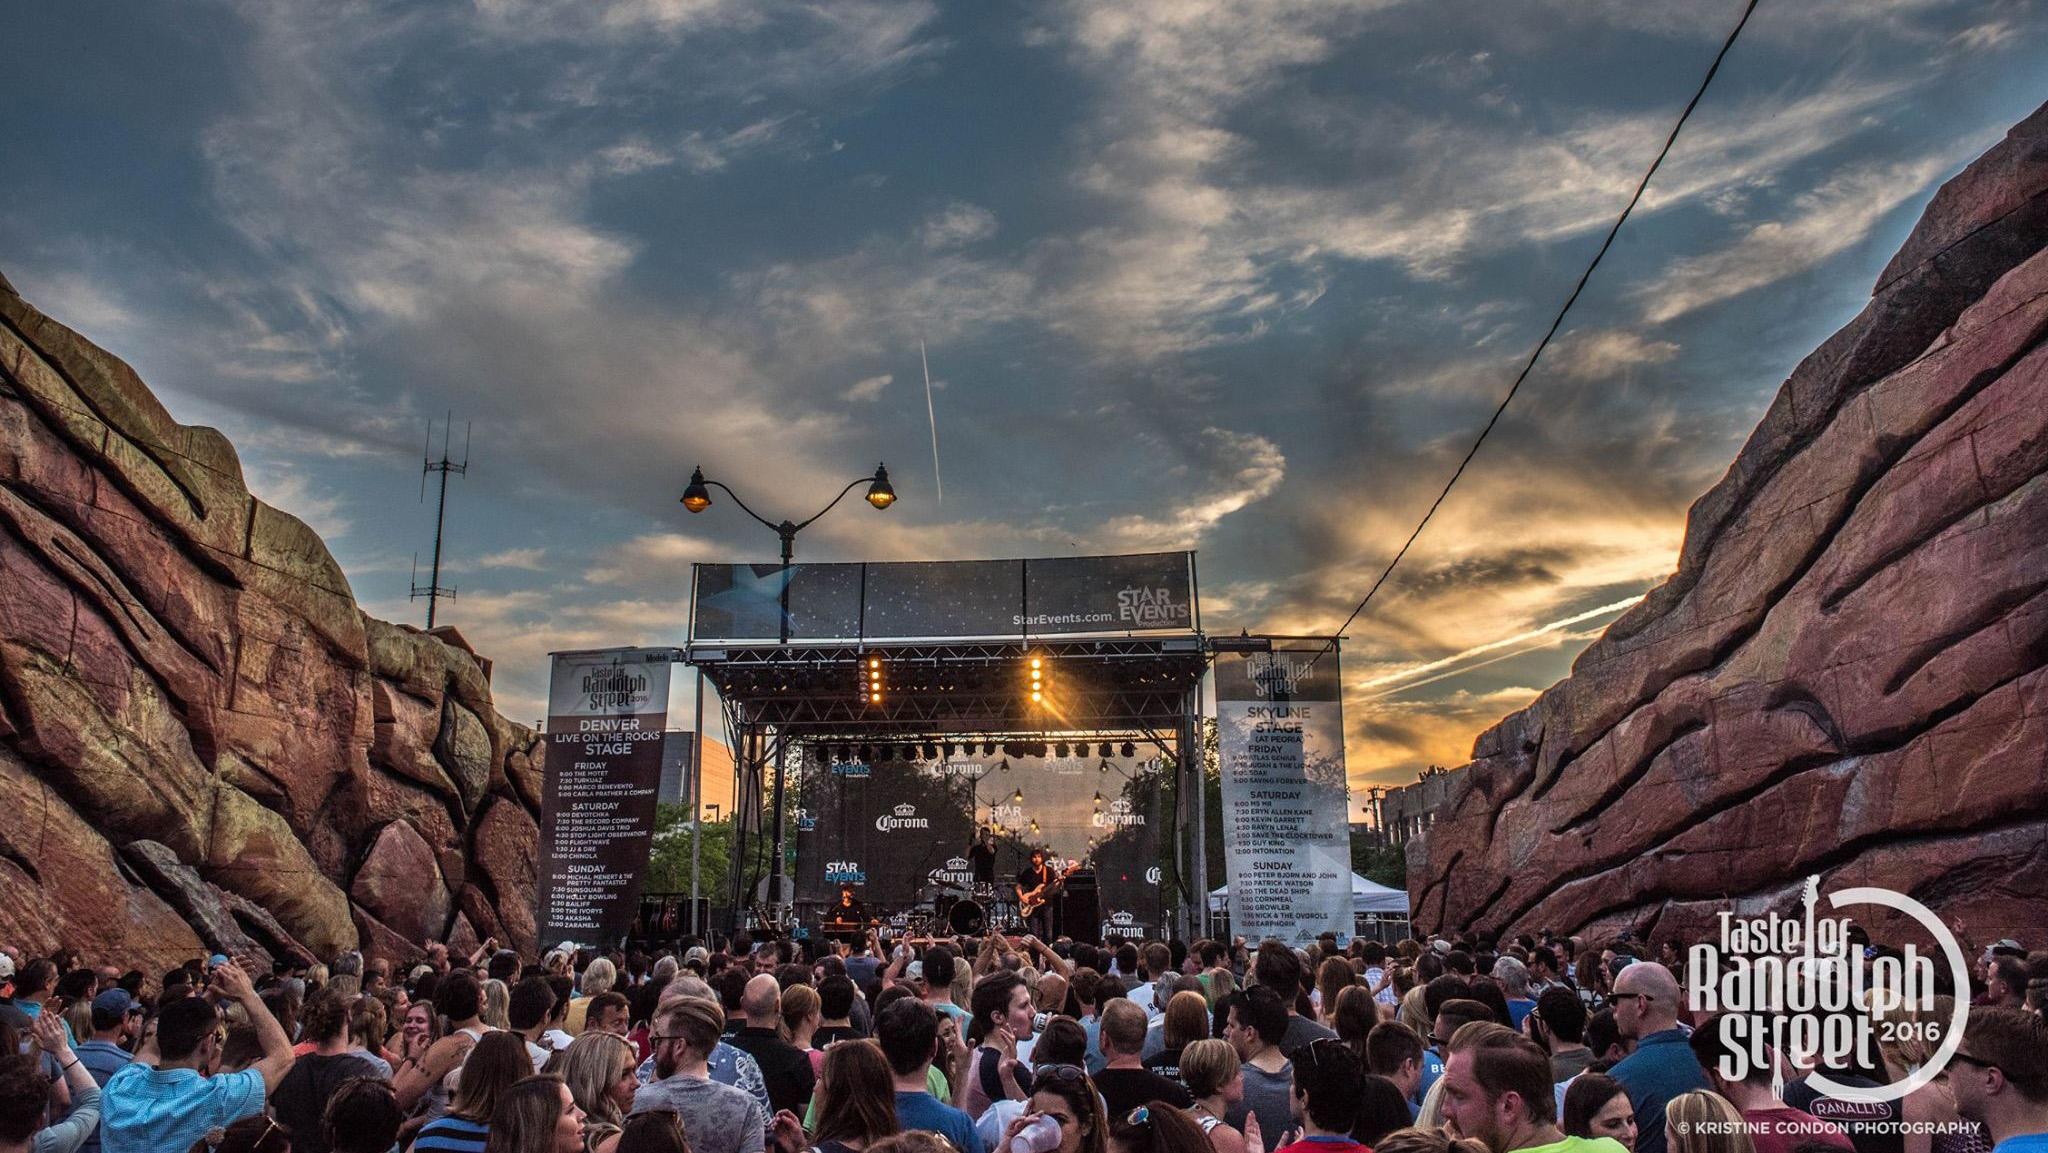 The Denver Live on the Rocks stage replicates Colorado's infamous Red Rocks Amphitheater. (Taste of Randolph / Facebook)